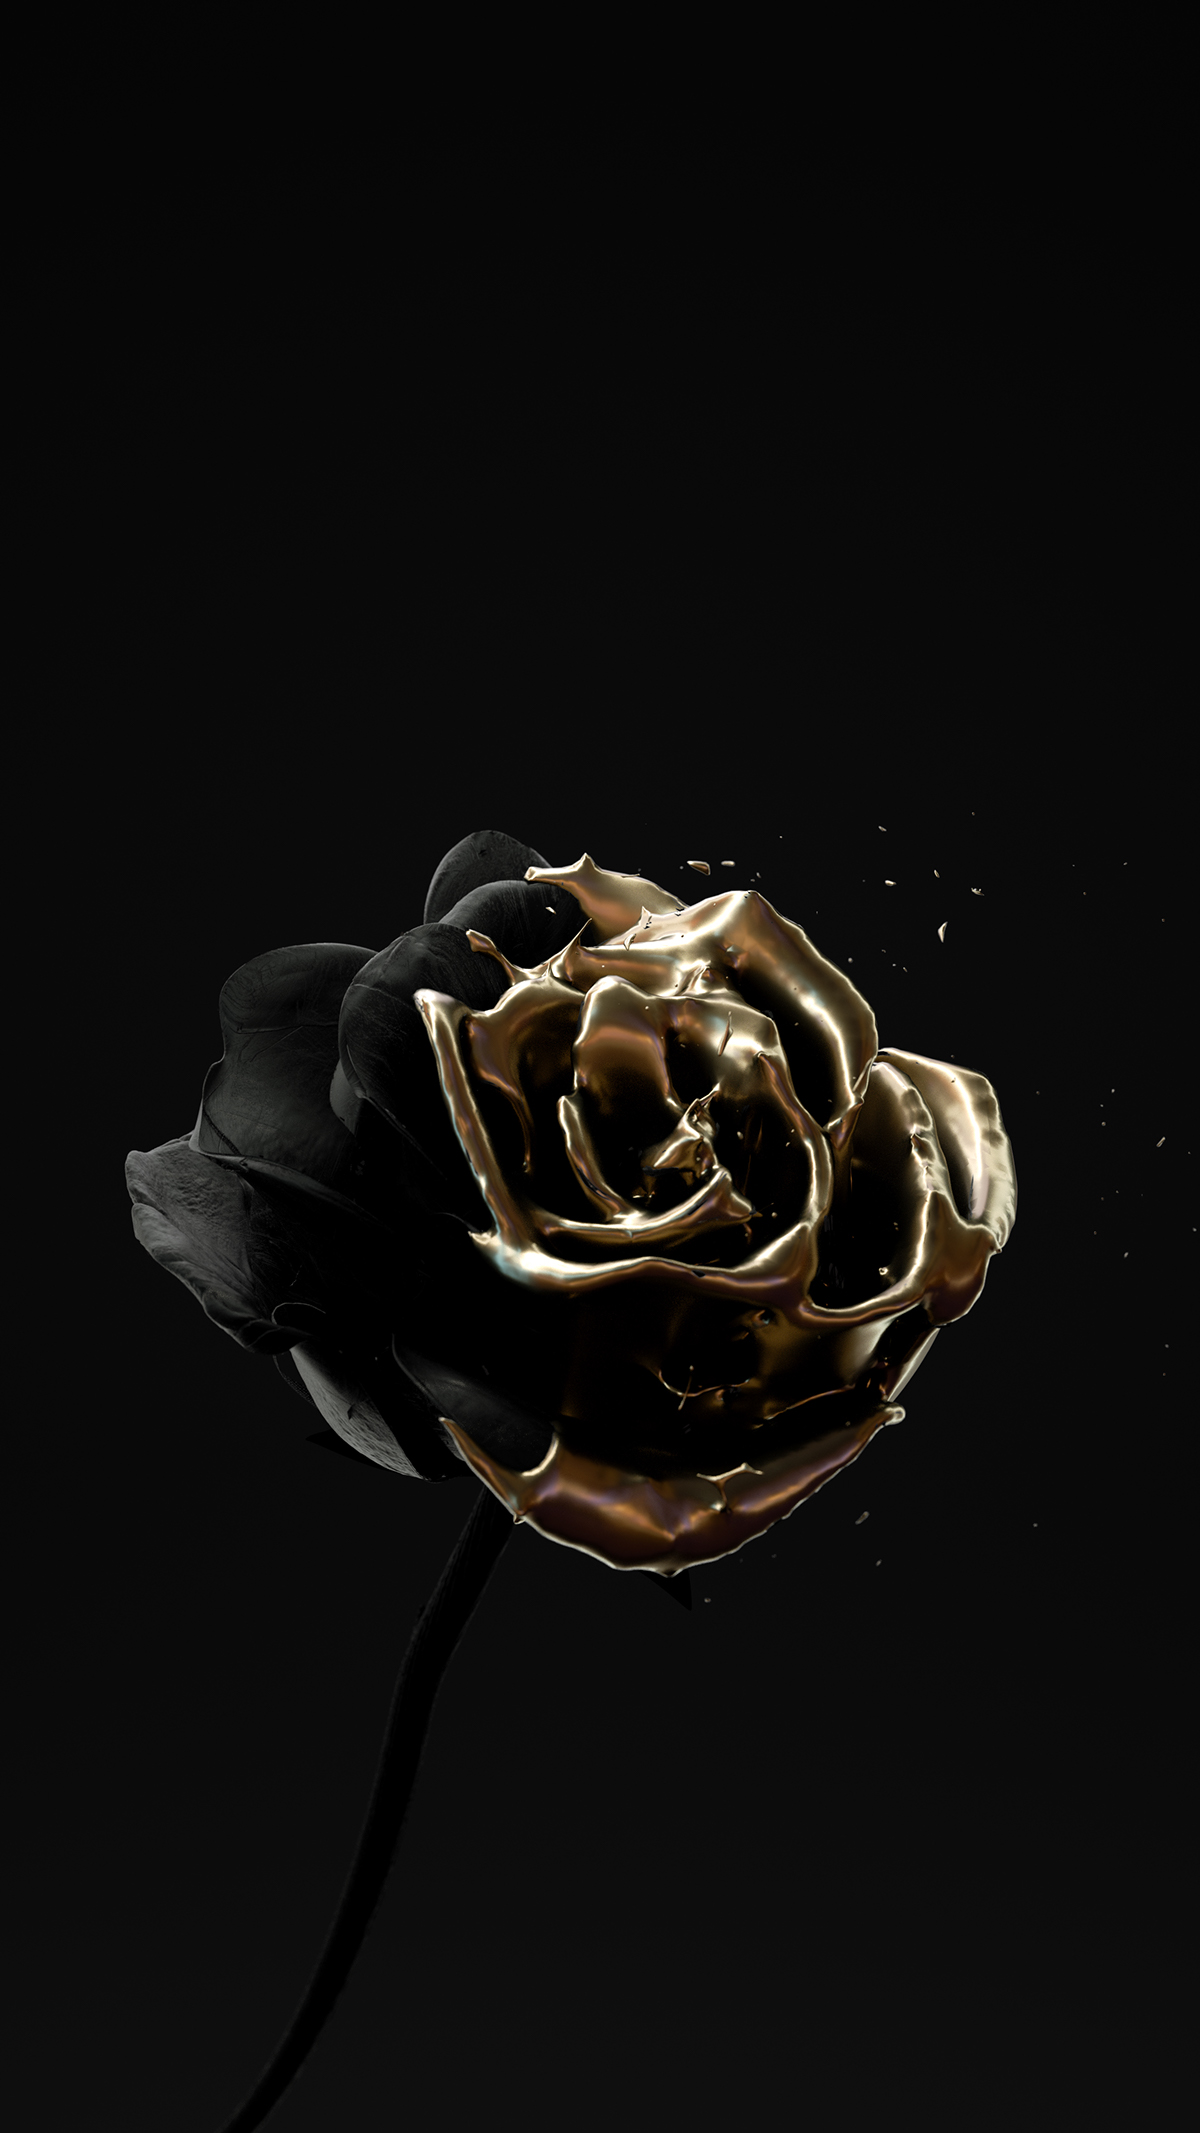 Roses Are Dead – Vol. 4 “Black and Gold” on Behance